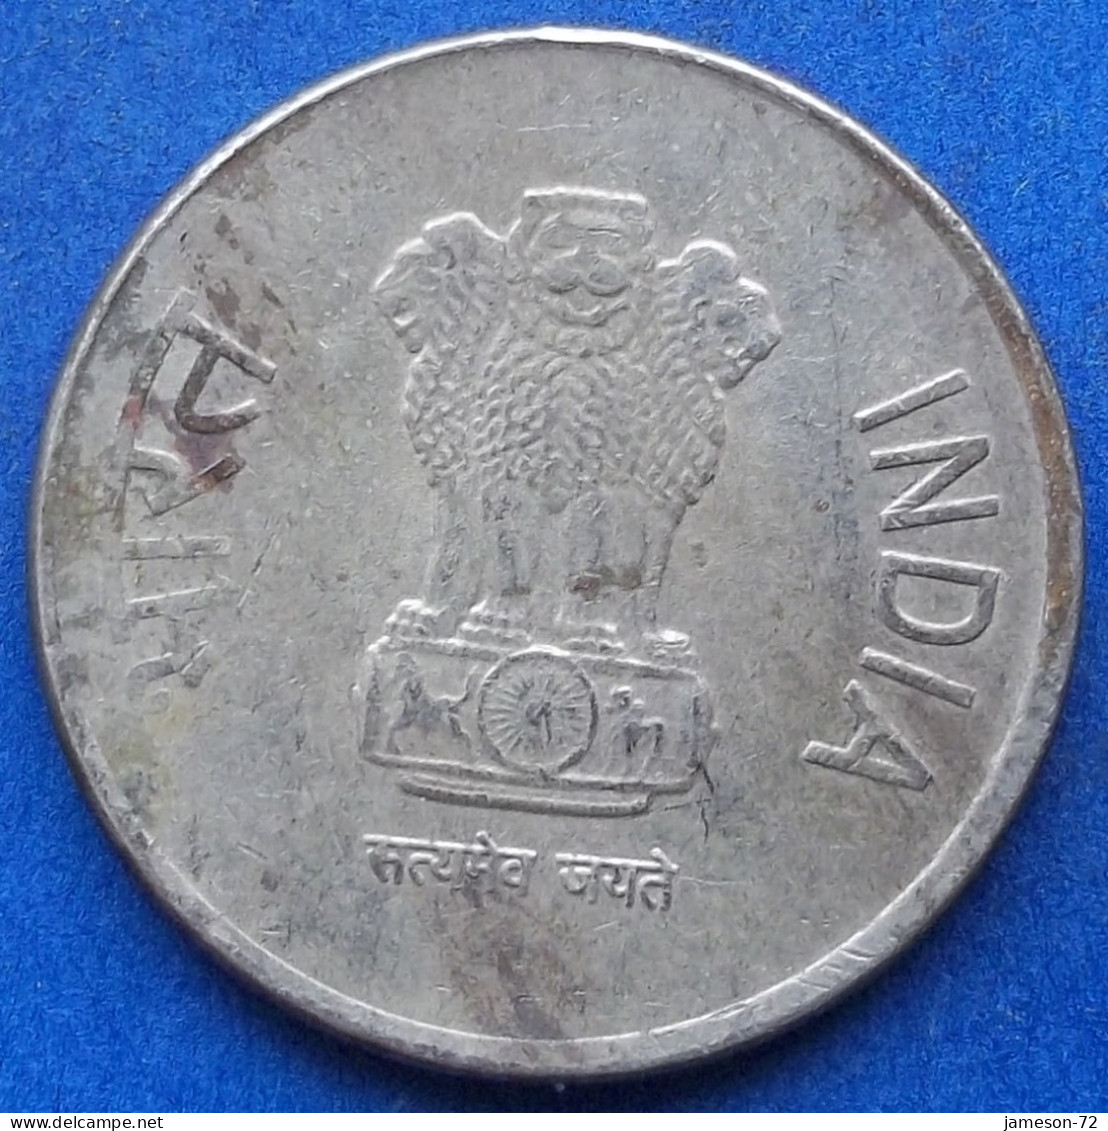 INDIA - 5 Rupees 2017 "Lotus Flowers" KM# 399.1 Republic Decimal Coinage (1957) - Edelweiss Coins - Georgia